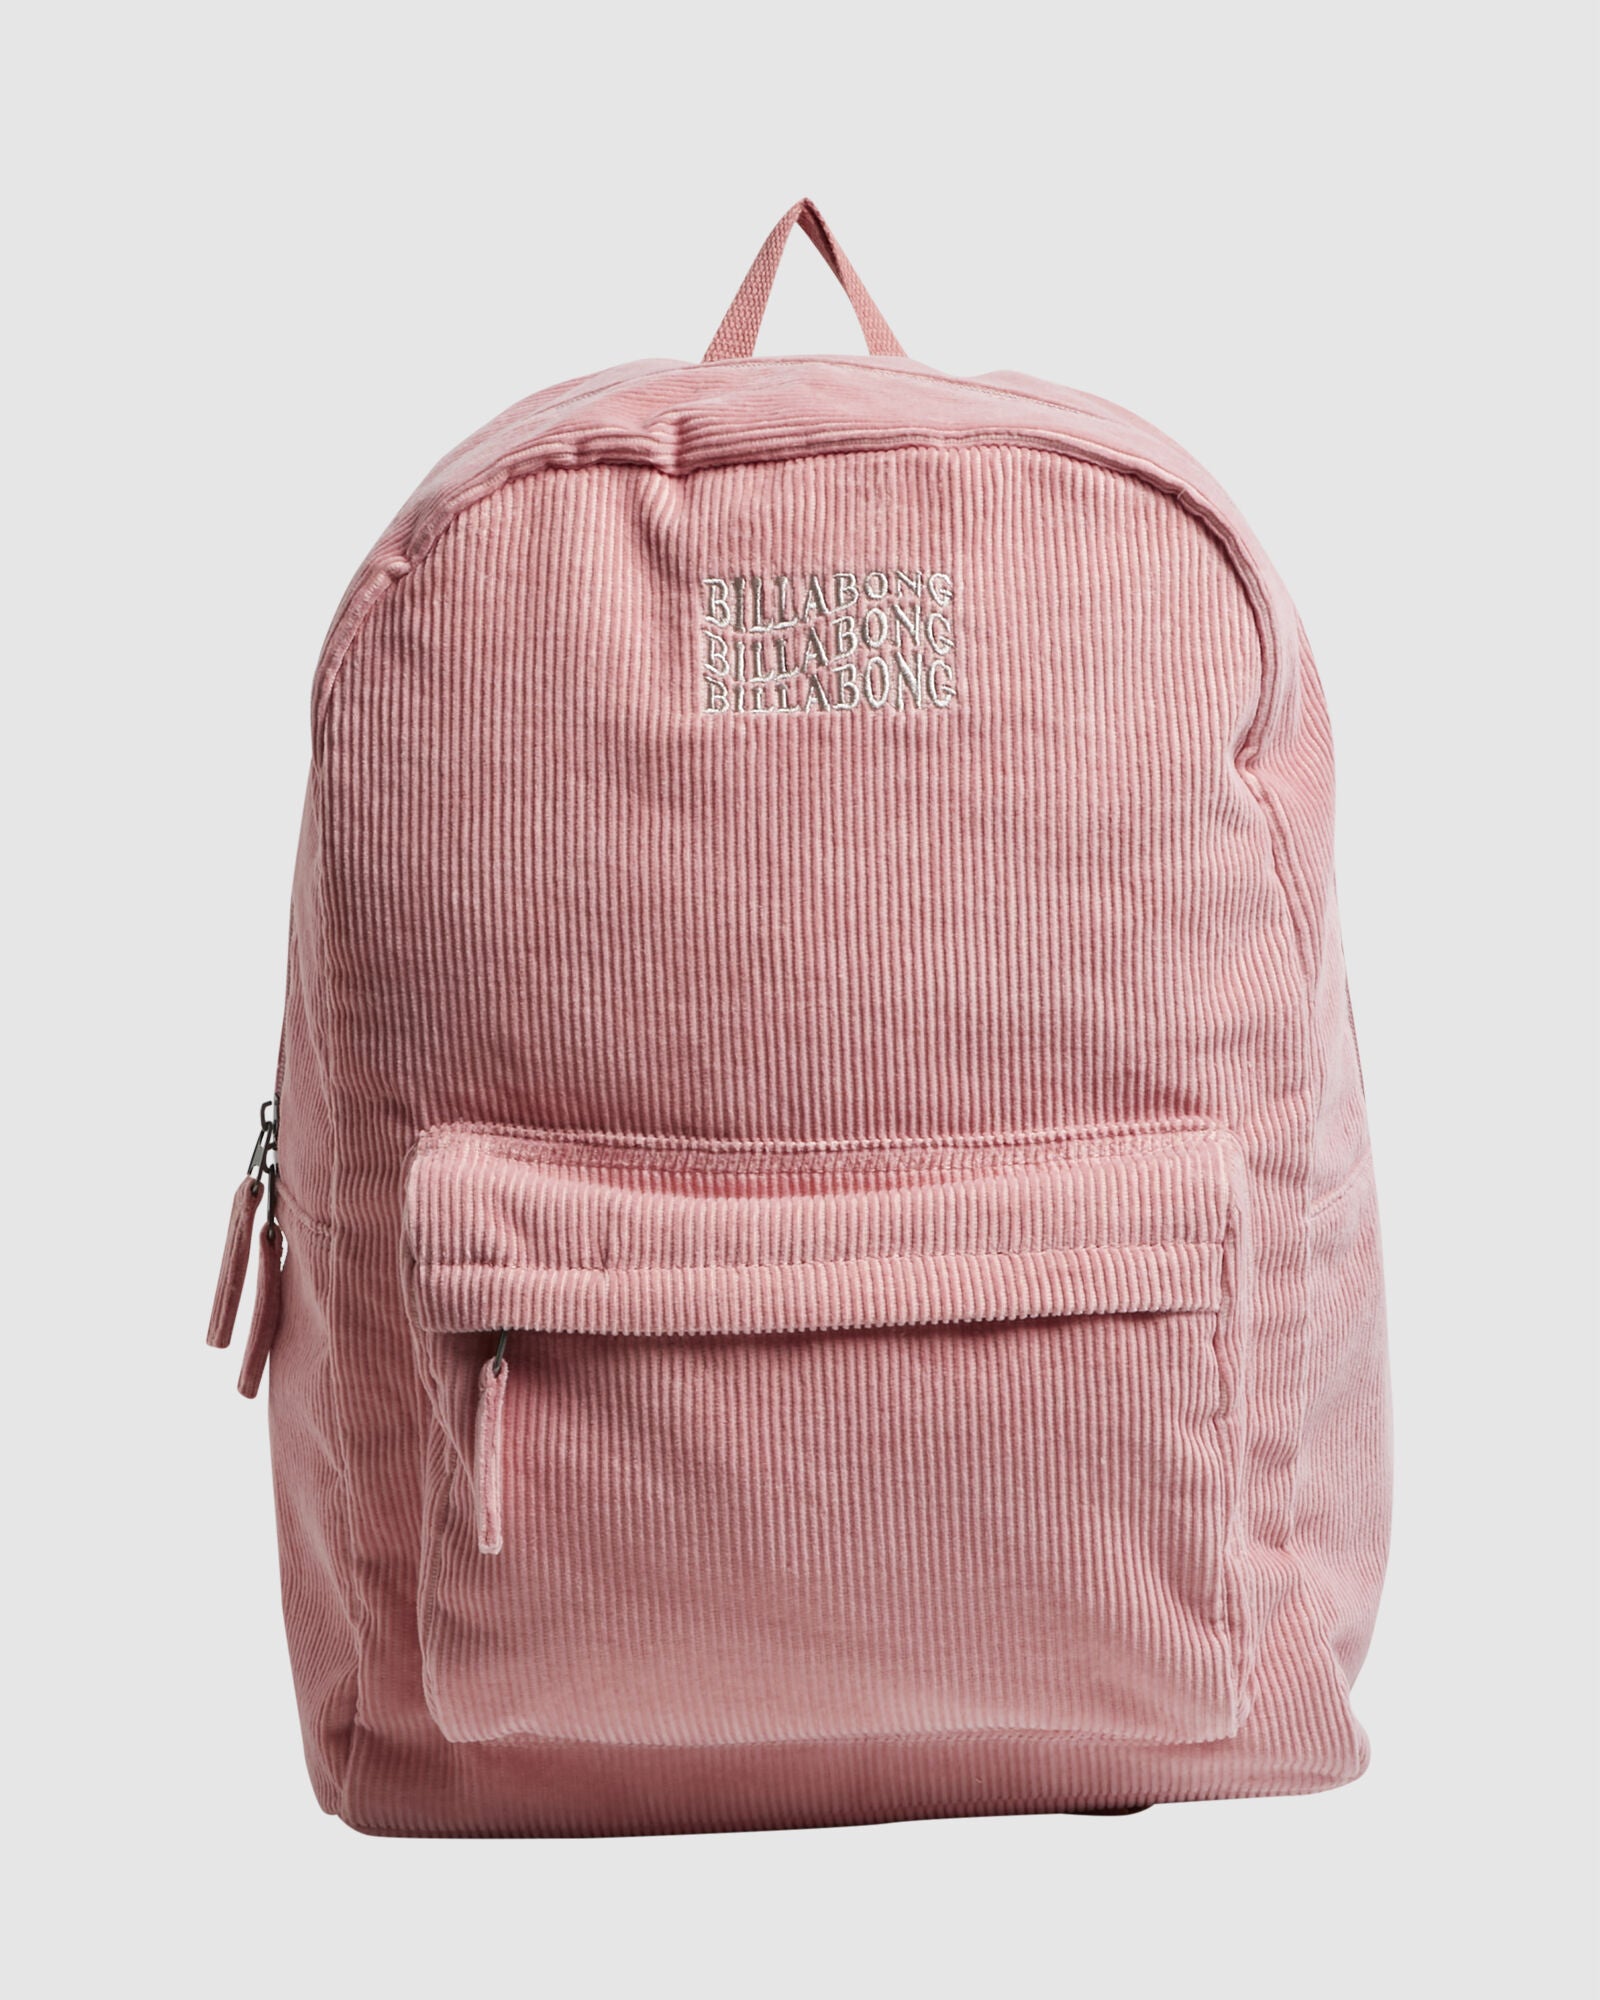 SCHOOLS OUT BACKPACK LIGHT SORBET BILLABONG LADIES BACK TO SCHOOL ACCESSORIES Polyester corduroy fabric COMPARTMENTS